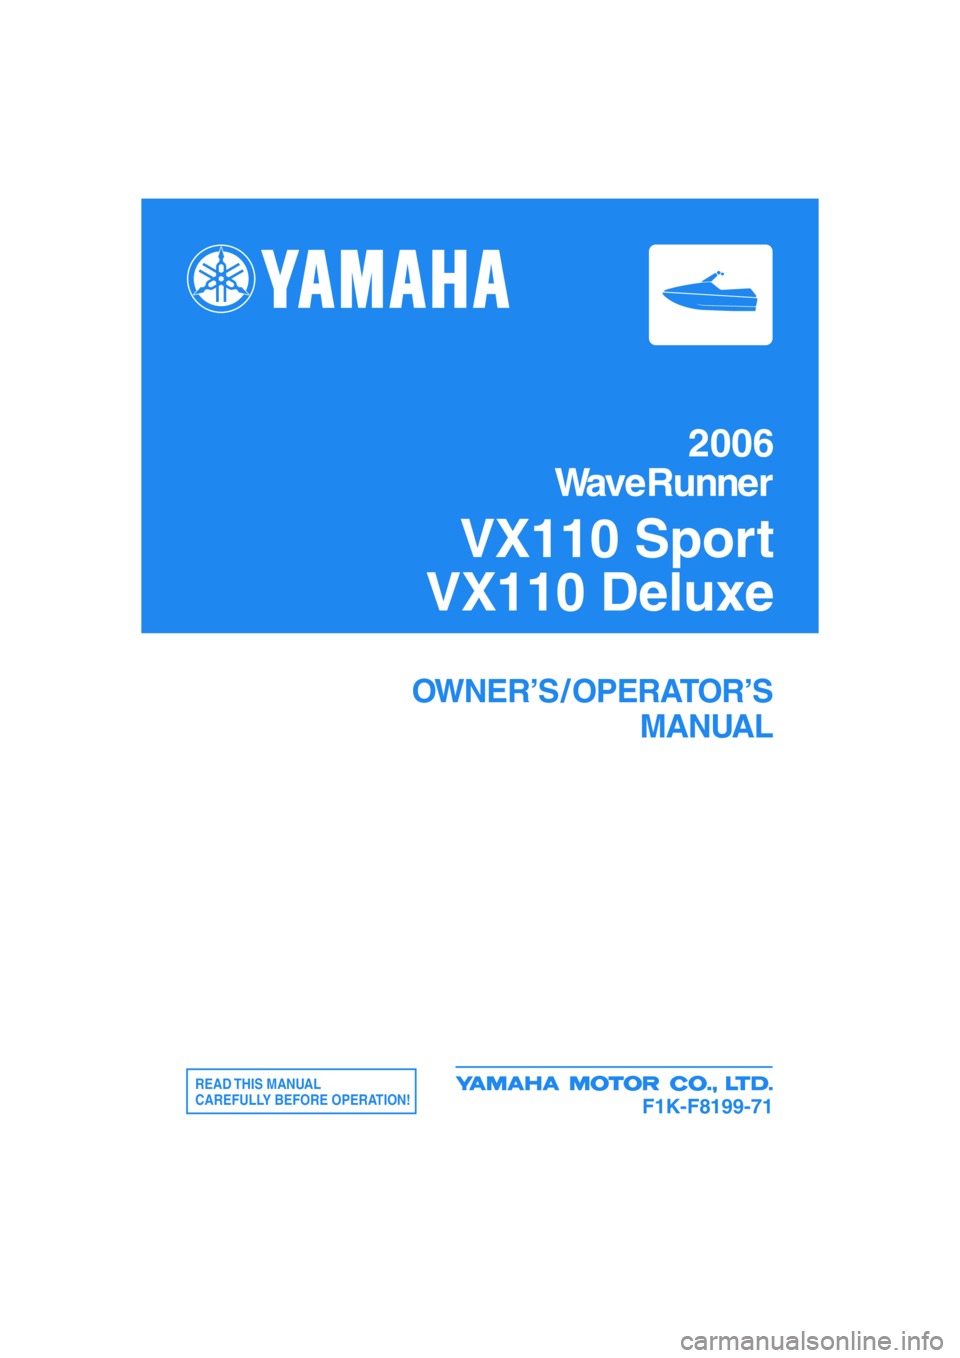 YAMAHA VX 2006  Owners Manual 2006
WaveRunner
VX110 Sport
VX110 Deluxe
OWNER’S / OPERATOR’S
MANUAL
READ THIS  MANUAL
CAREFULLY BEFORE OPERATION!
F1K-F8199-71 